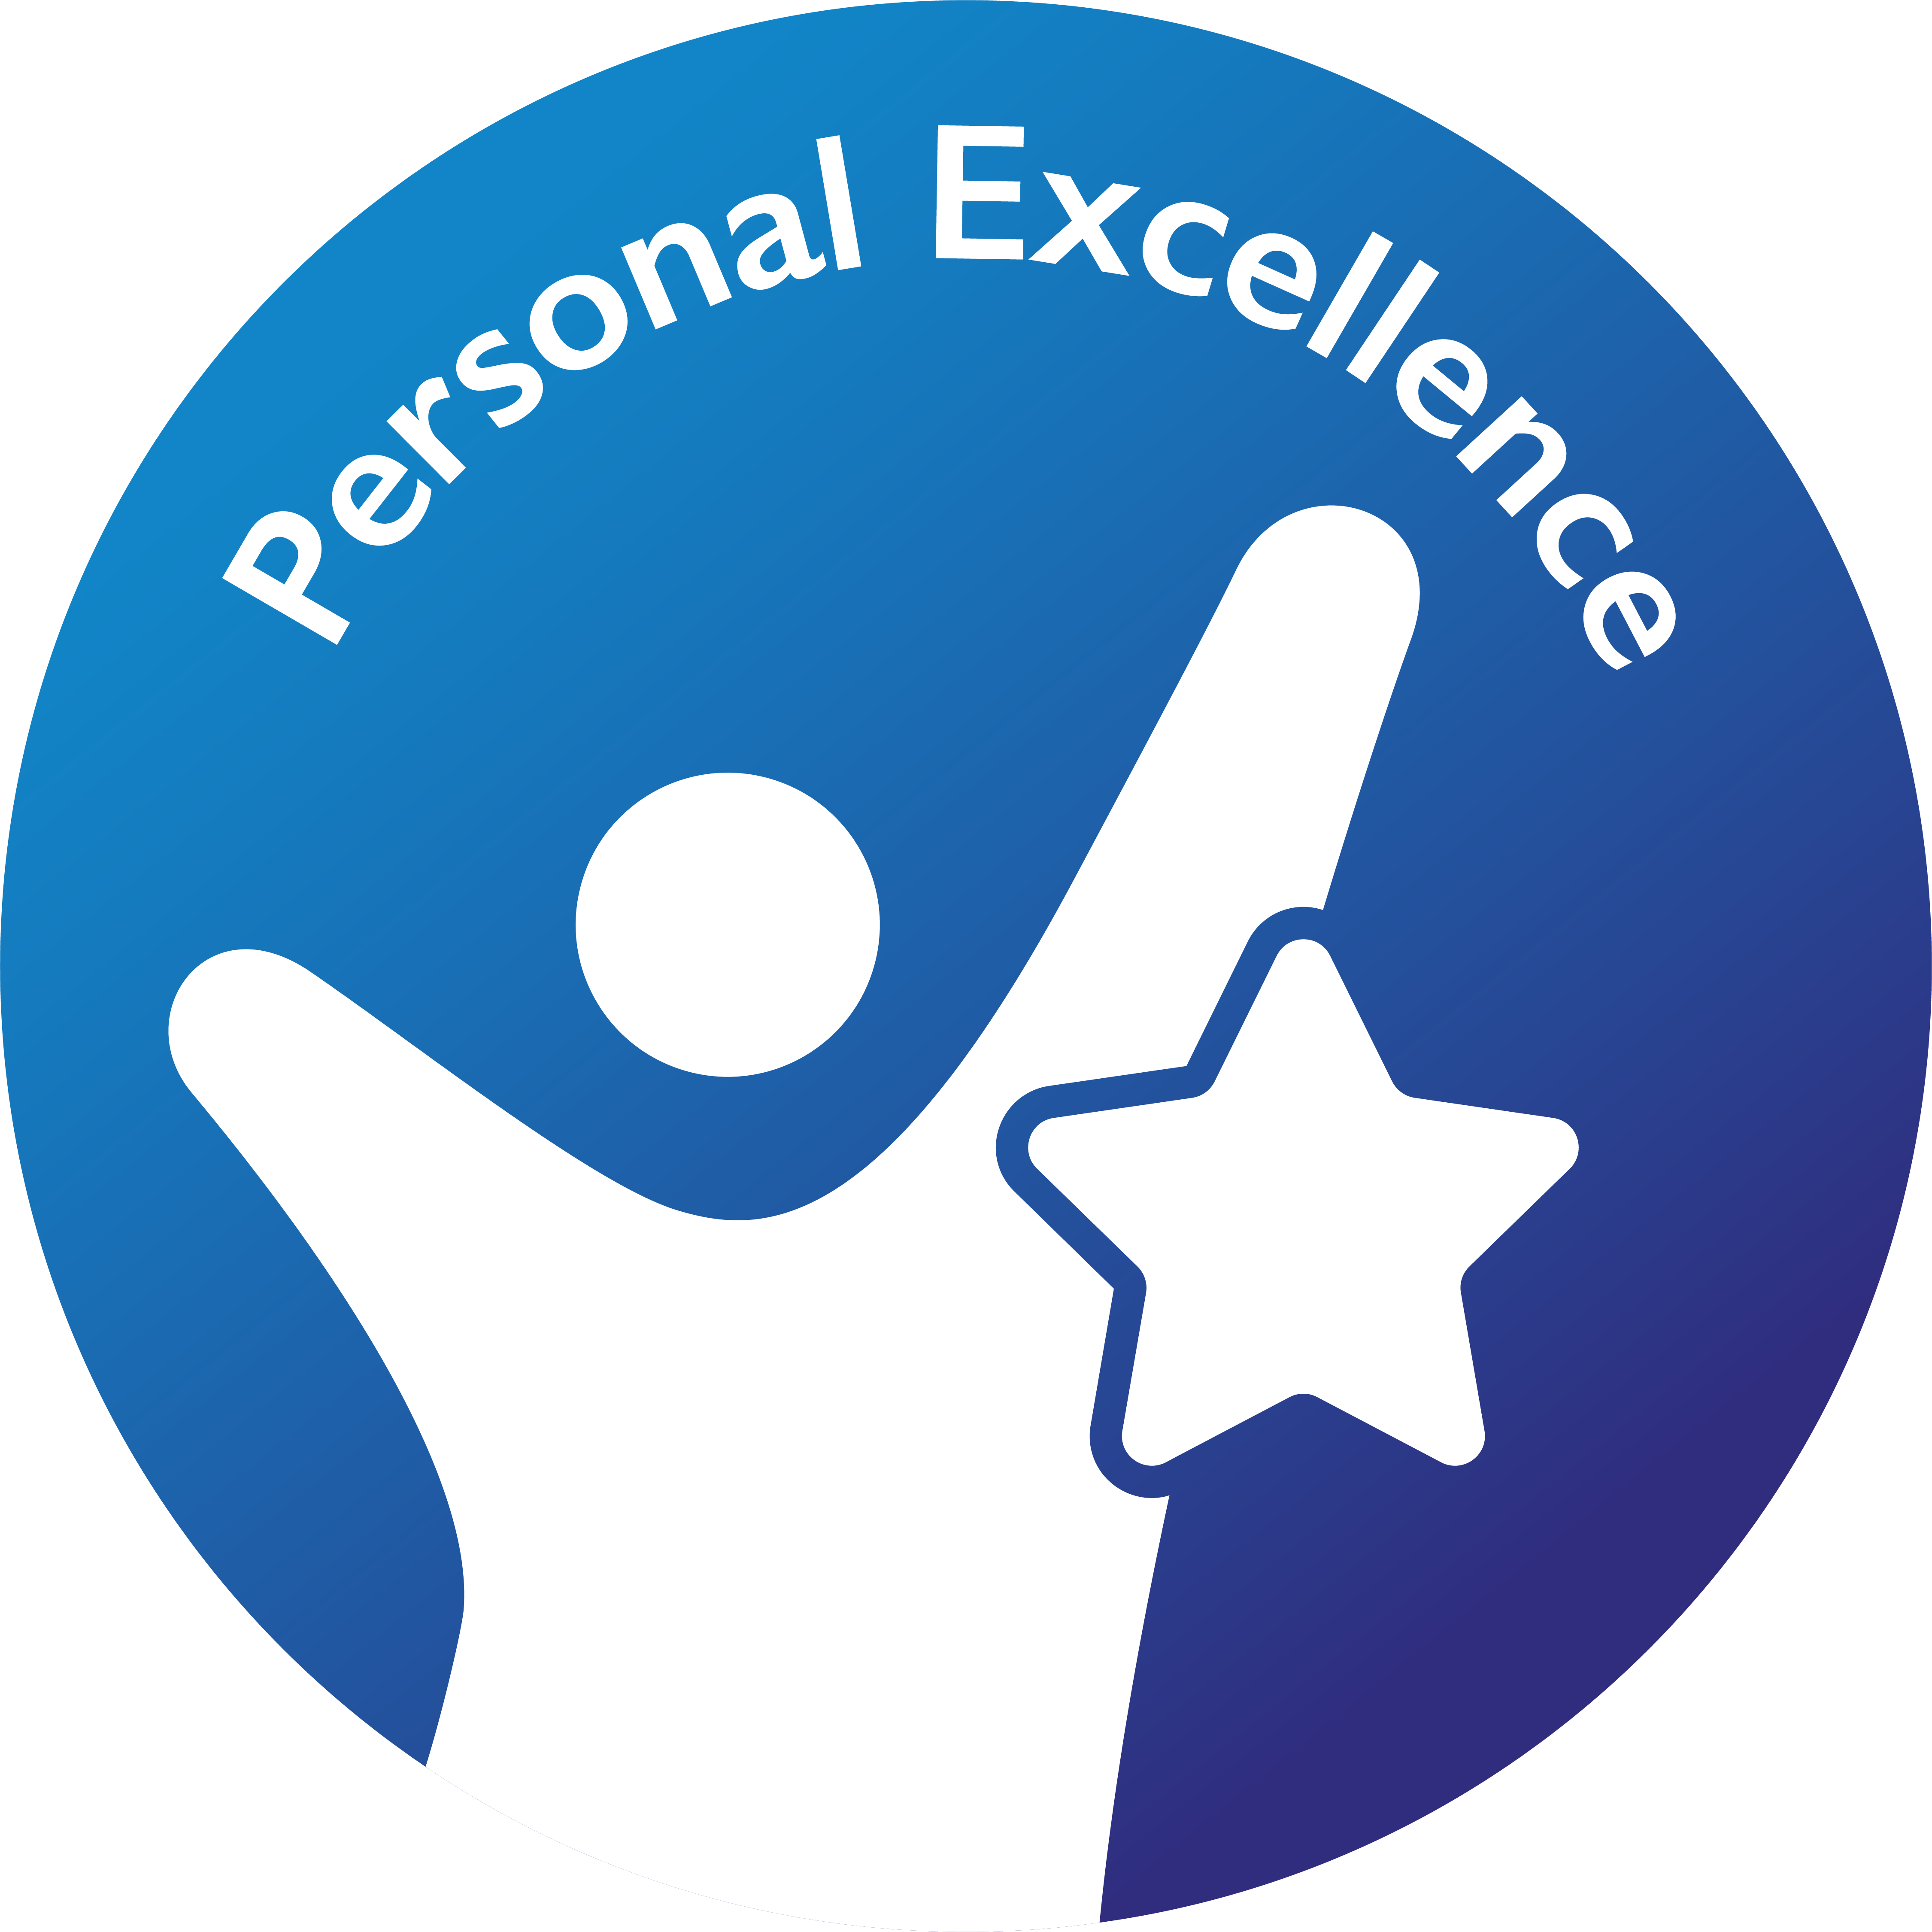 Personal Excellence